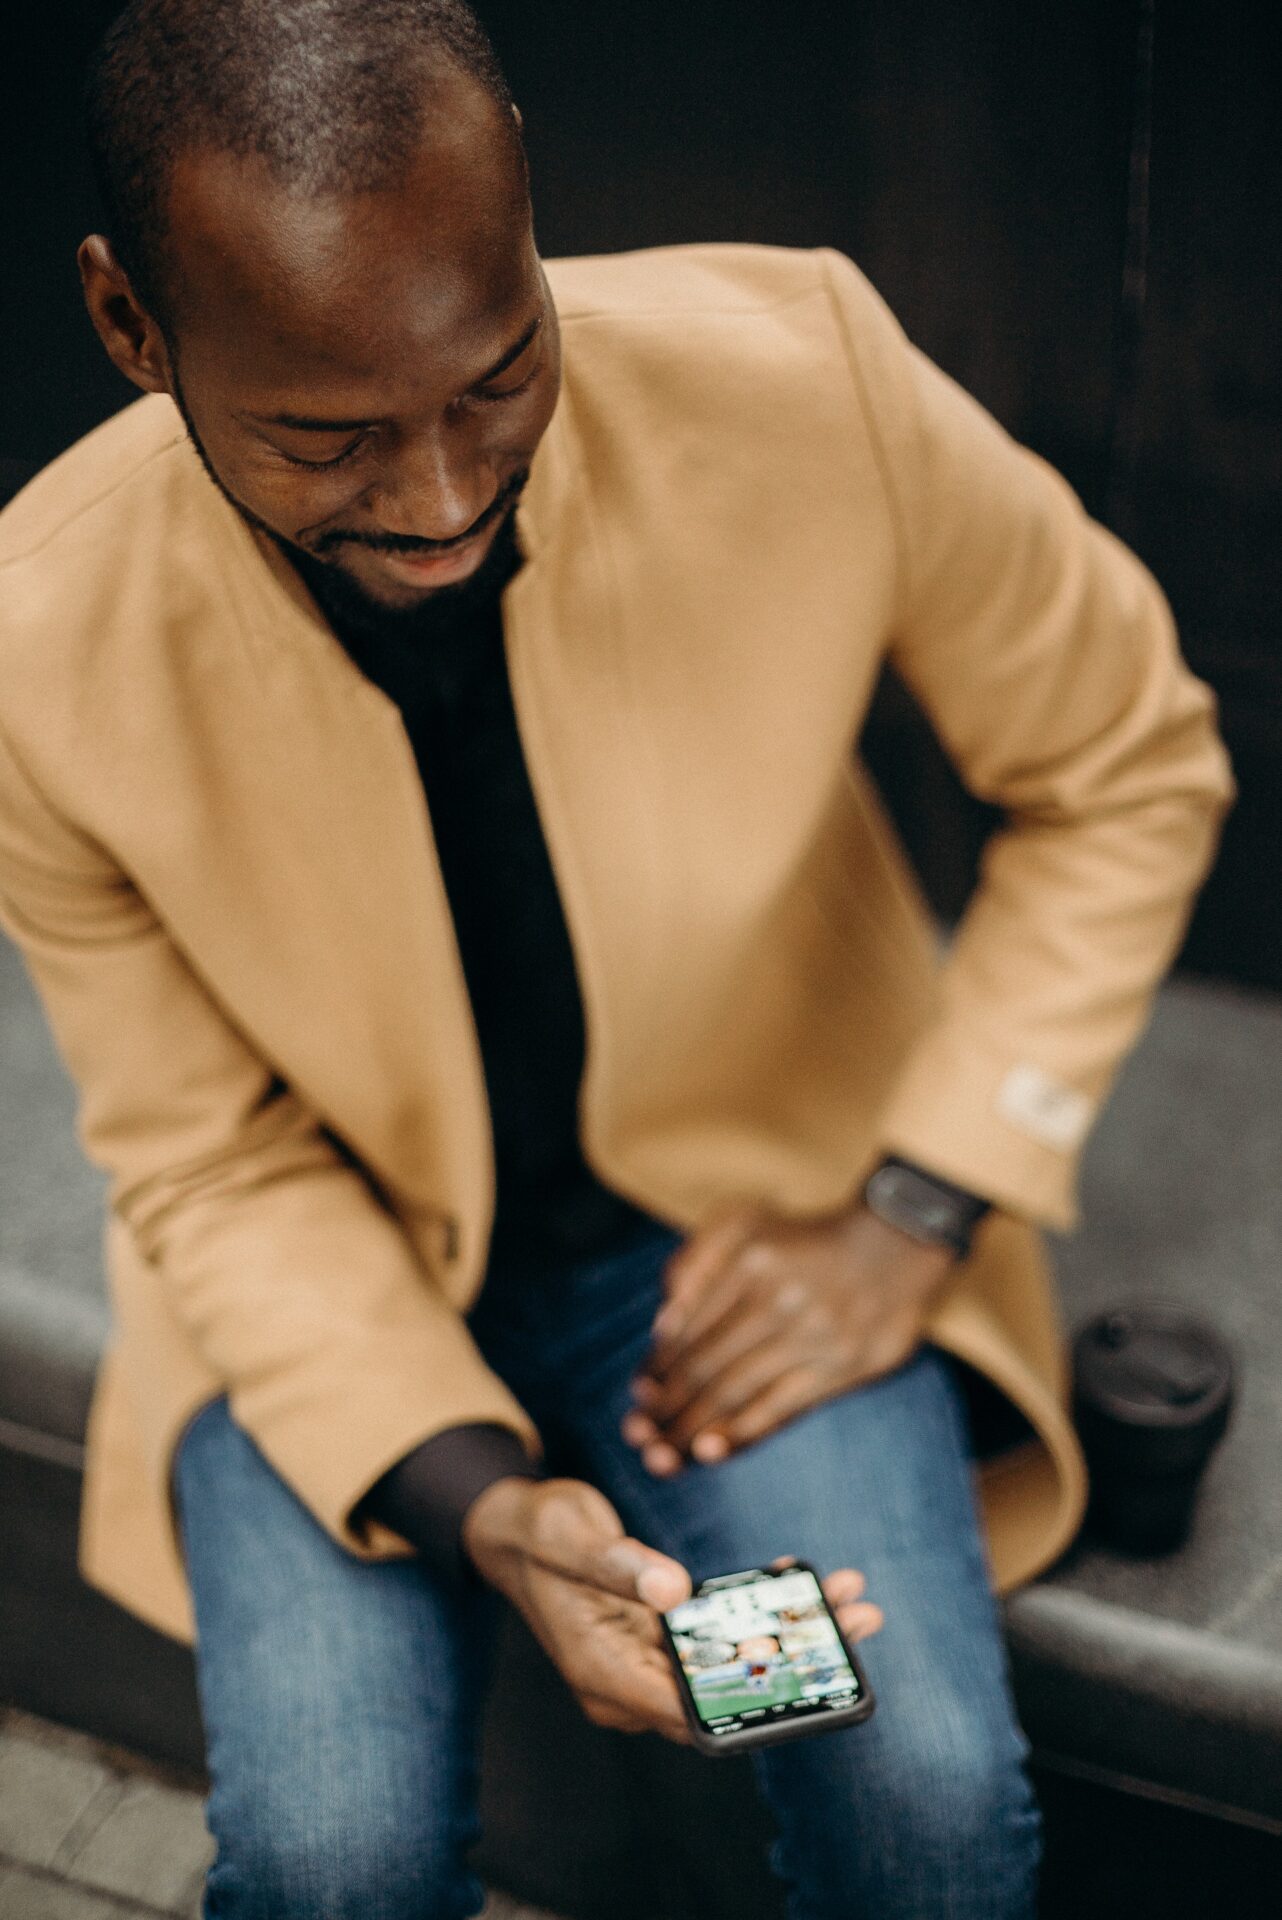 Man in camel-colored suit sitting down looking at his phone